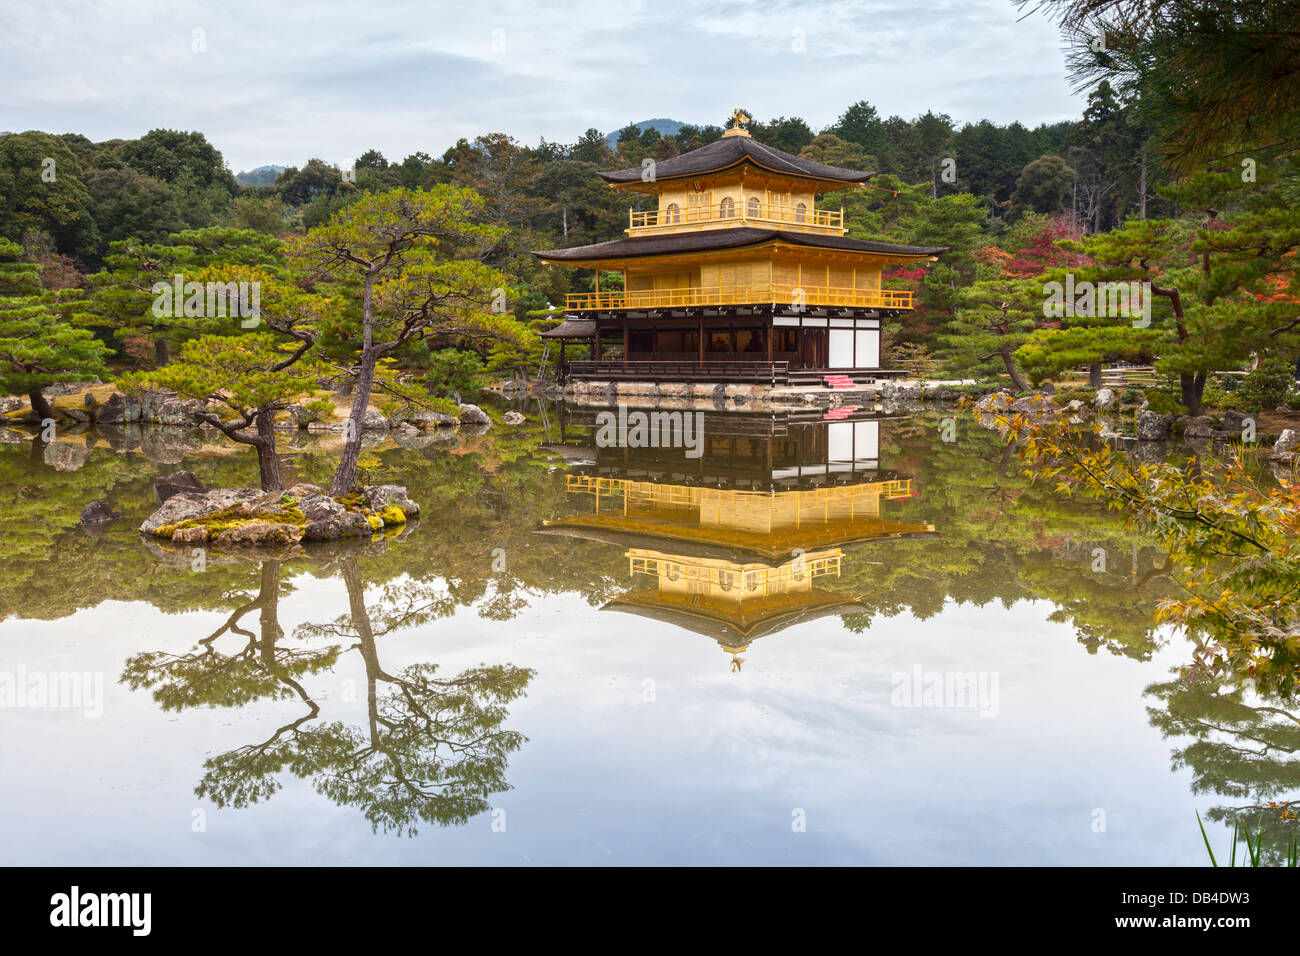 The Golden Pavilion of the temple of Kinkaku-ji or Rokuon-ji in Kyoto, seen in autumn. This Zen Buddhist temple is one of... Stock Photo